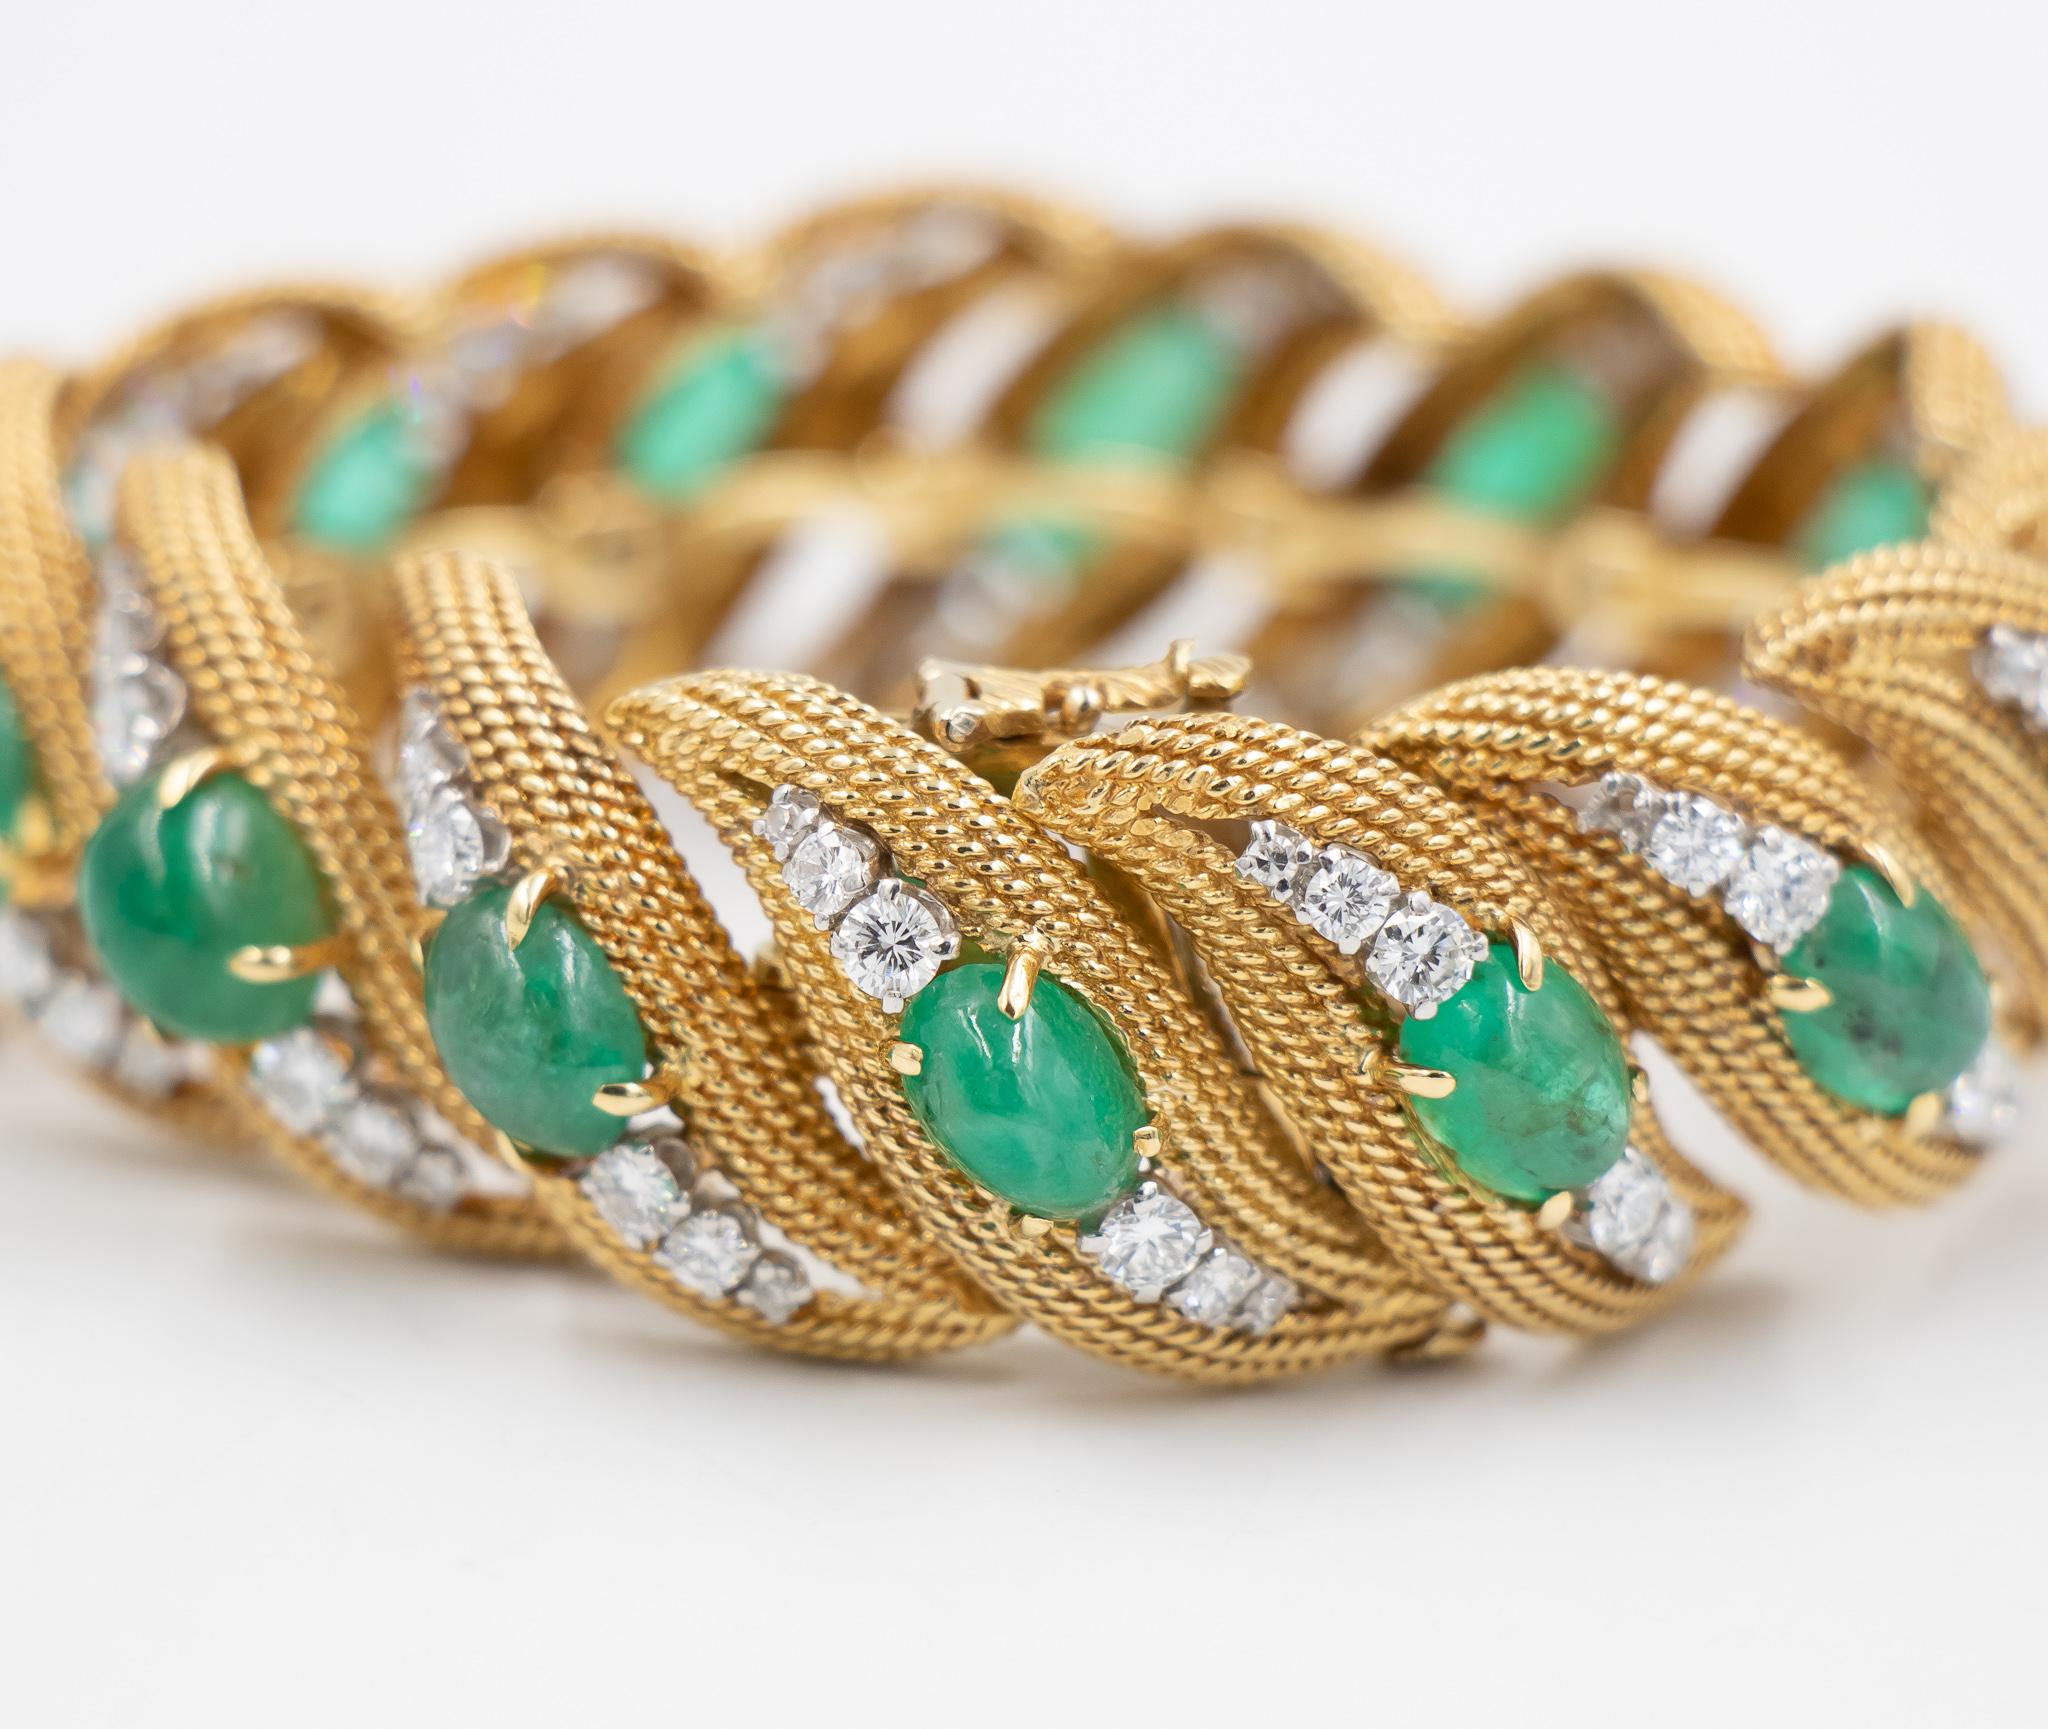 This incredible Graduated Emerald Ribbon  Bracelet was created by the iconic American jeweler, David Webb.  The cabachon emeralds accented by diamonds overlaying the 18k yellow gold is absolutely stunning in person.  The craftsmanship on this piece